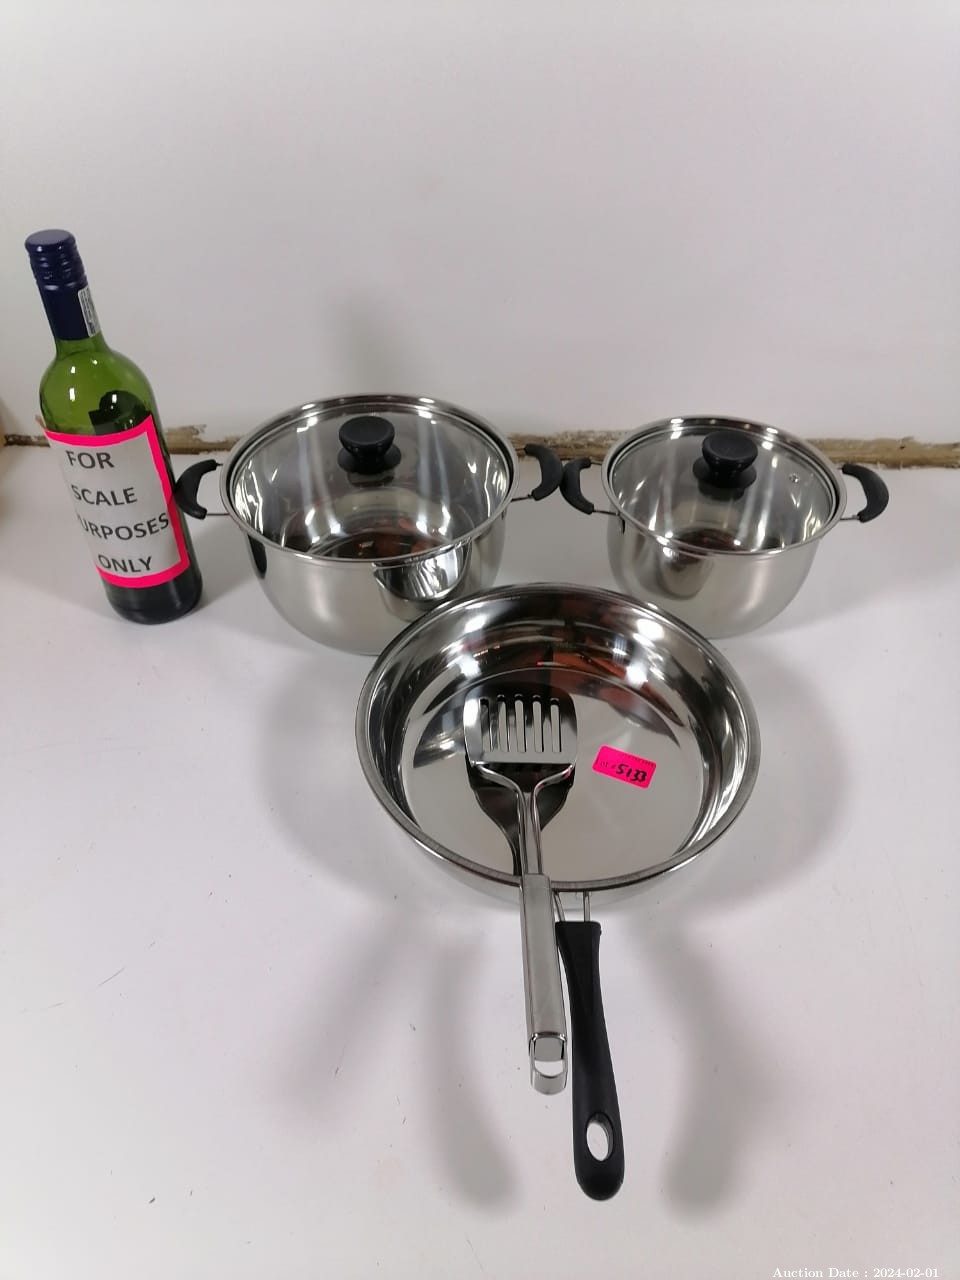 5134 - Stainless Steel Kitchenware - Pots, Frying Pan and Shovel